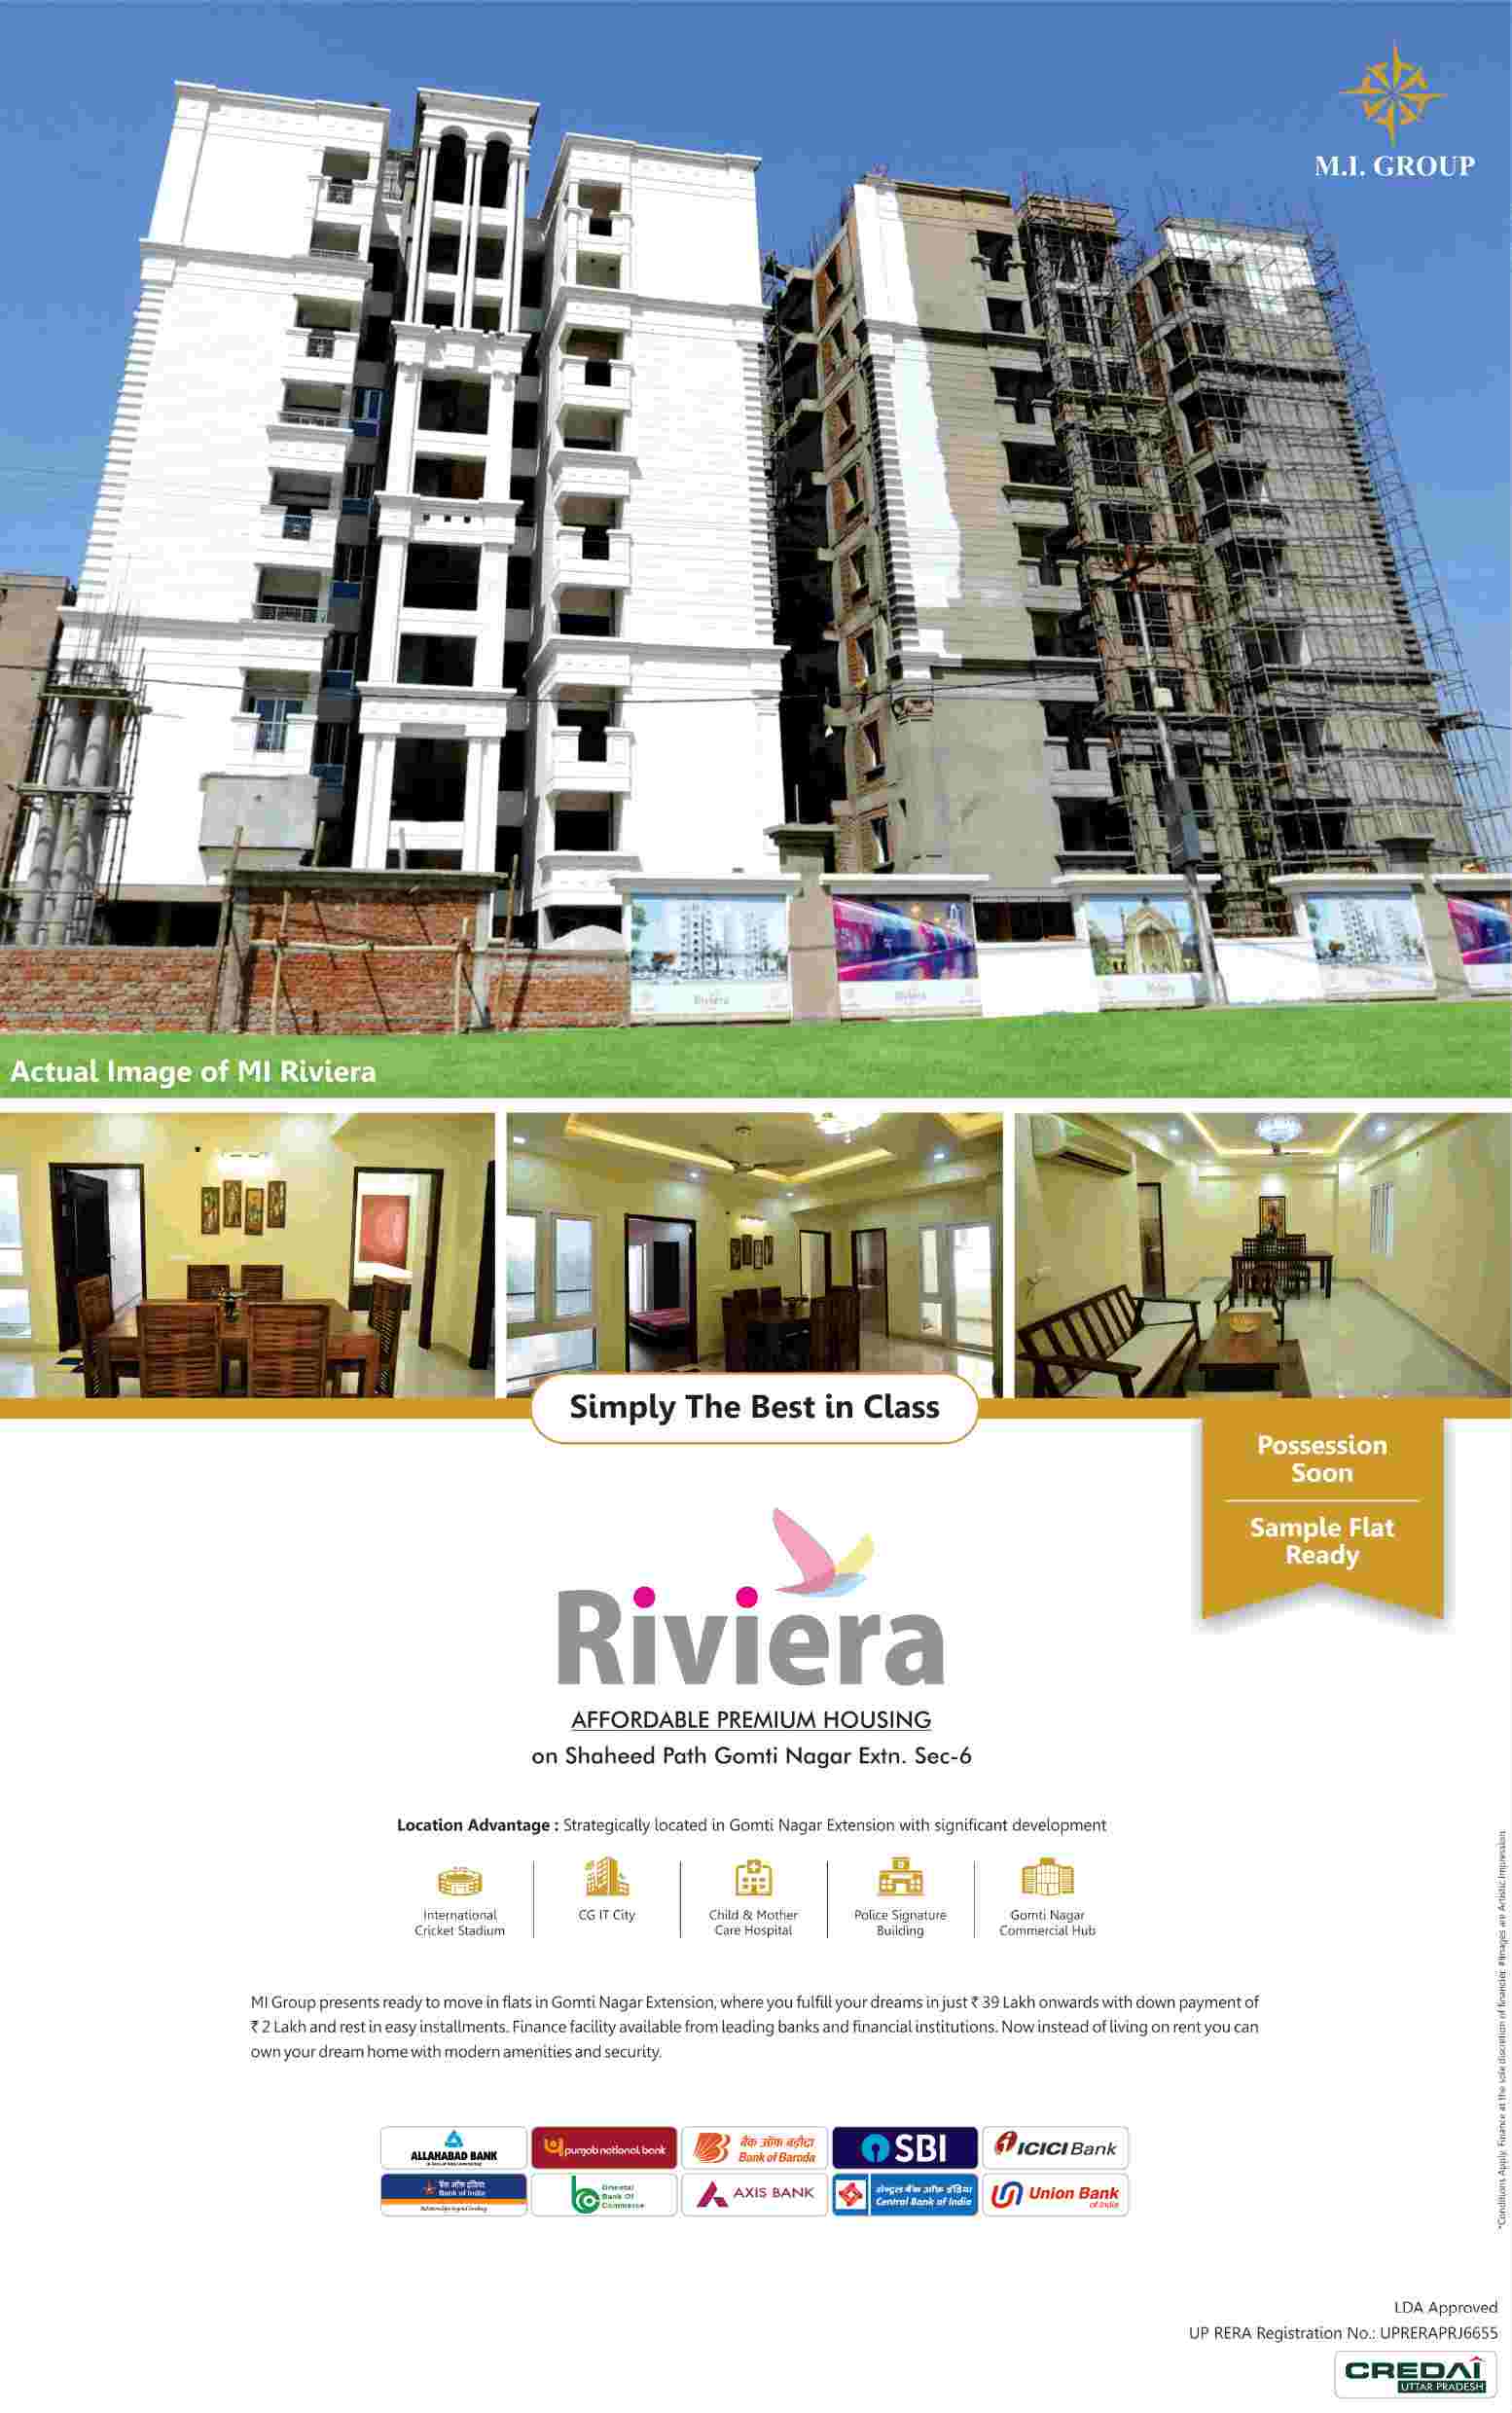 Pay just Rs. 2 lacs and book your home at MI Riviera in Lucknow